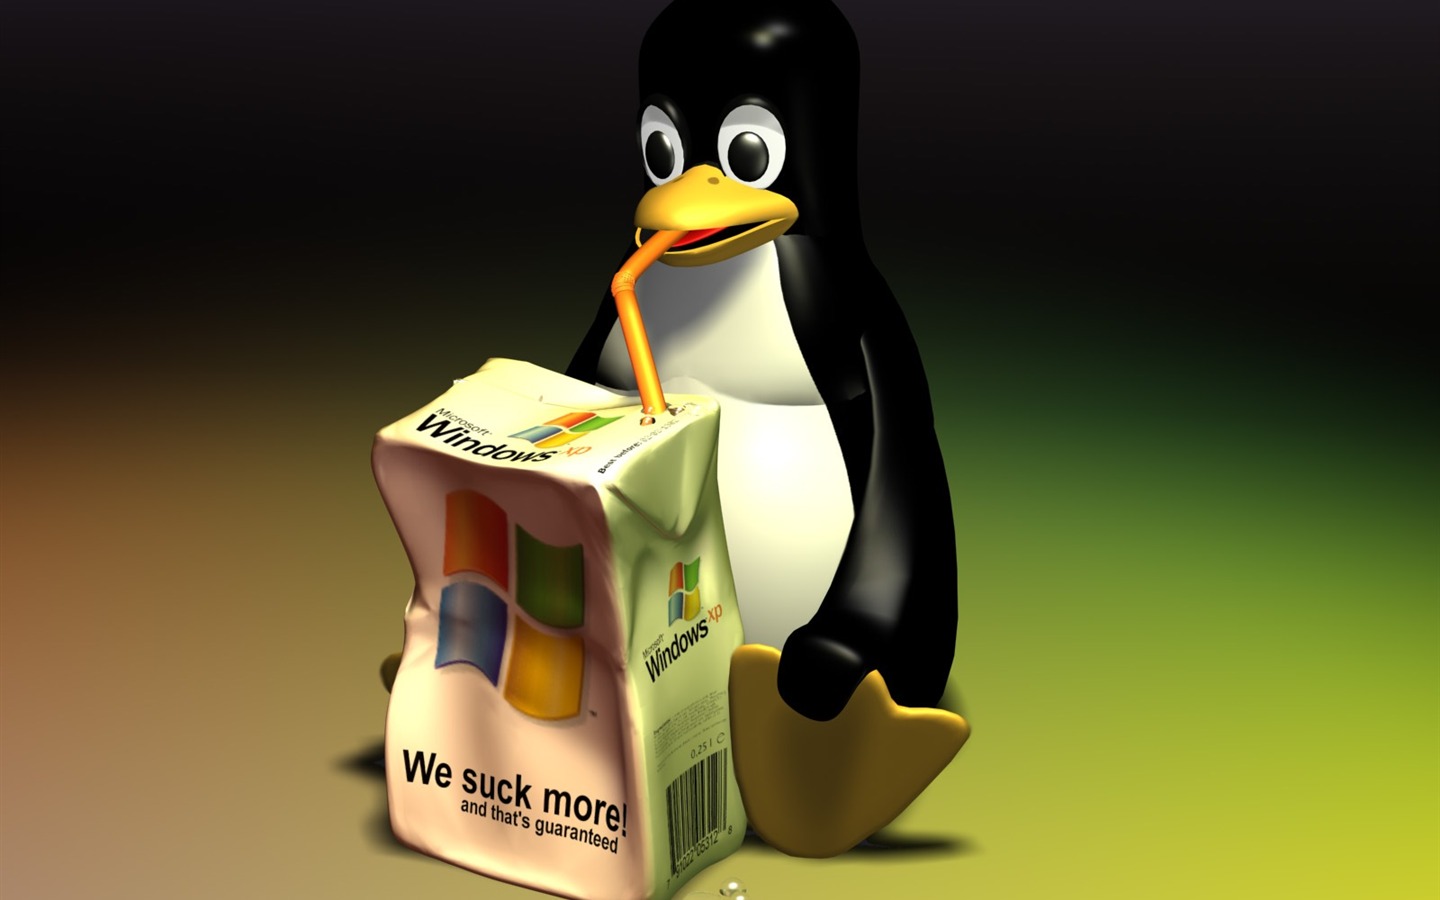 Linux tapety (1) #7 - 1440x900